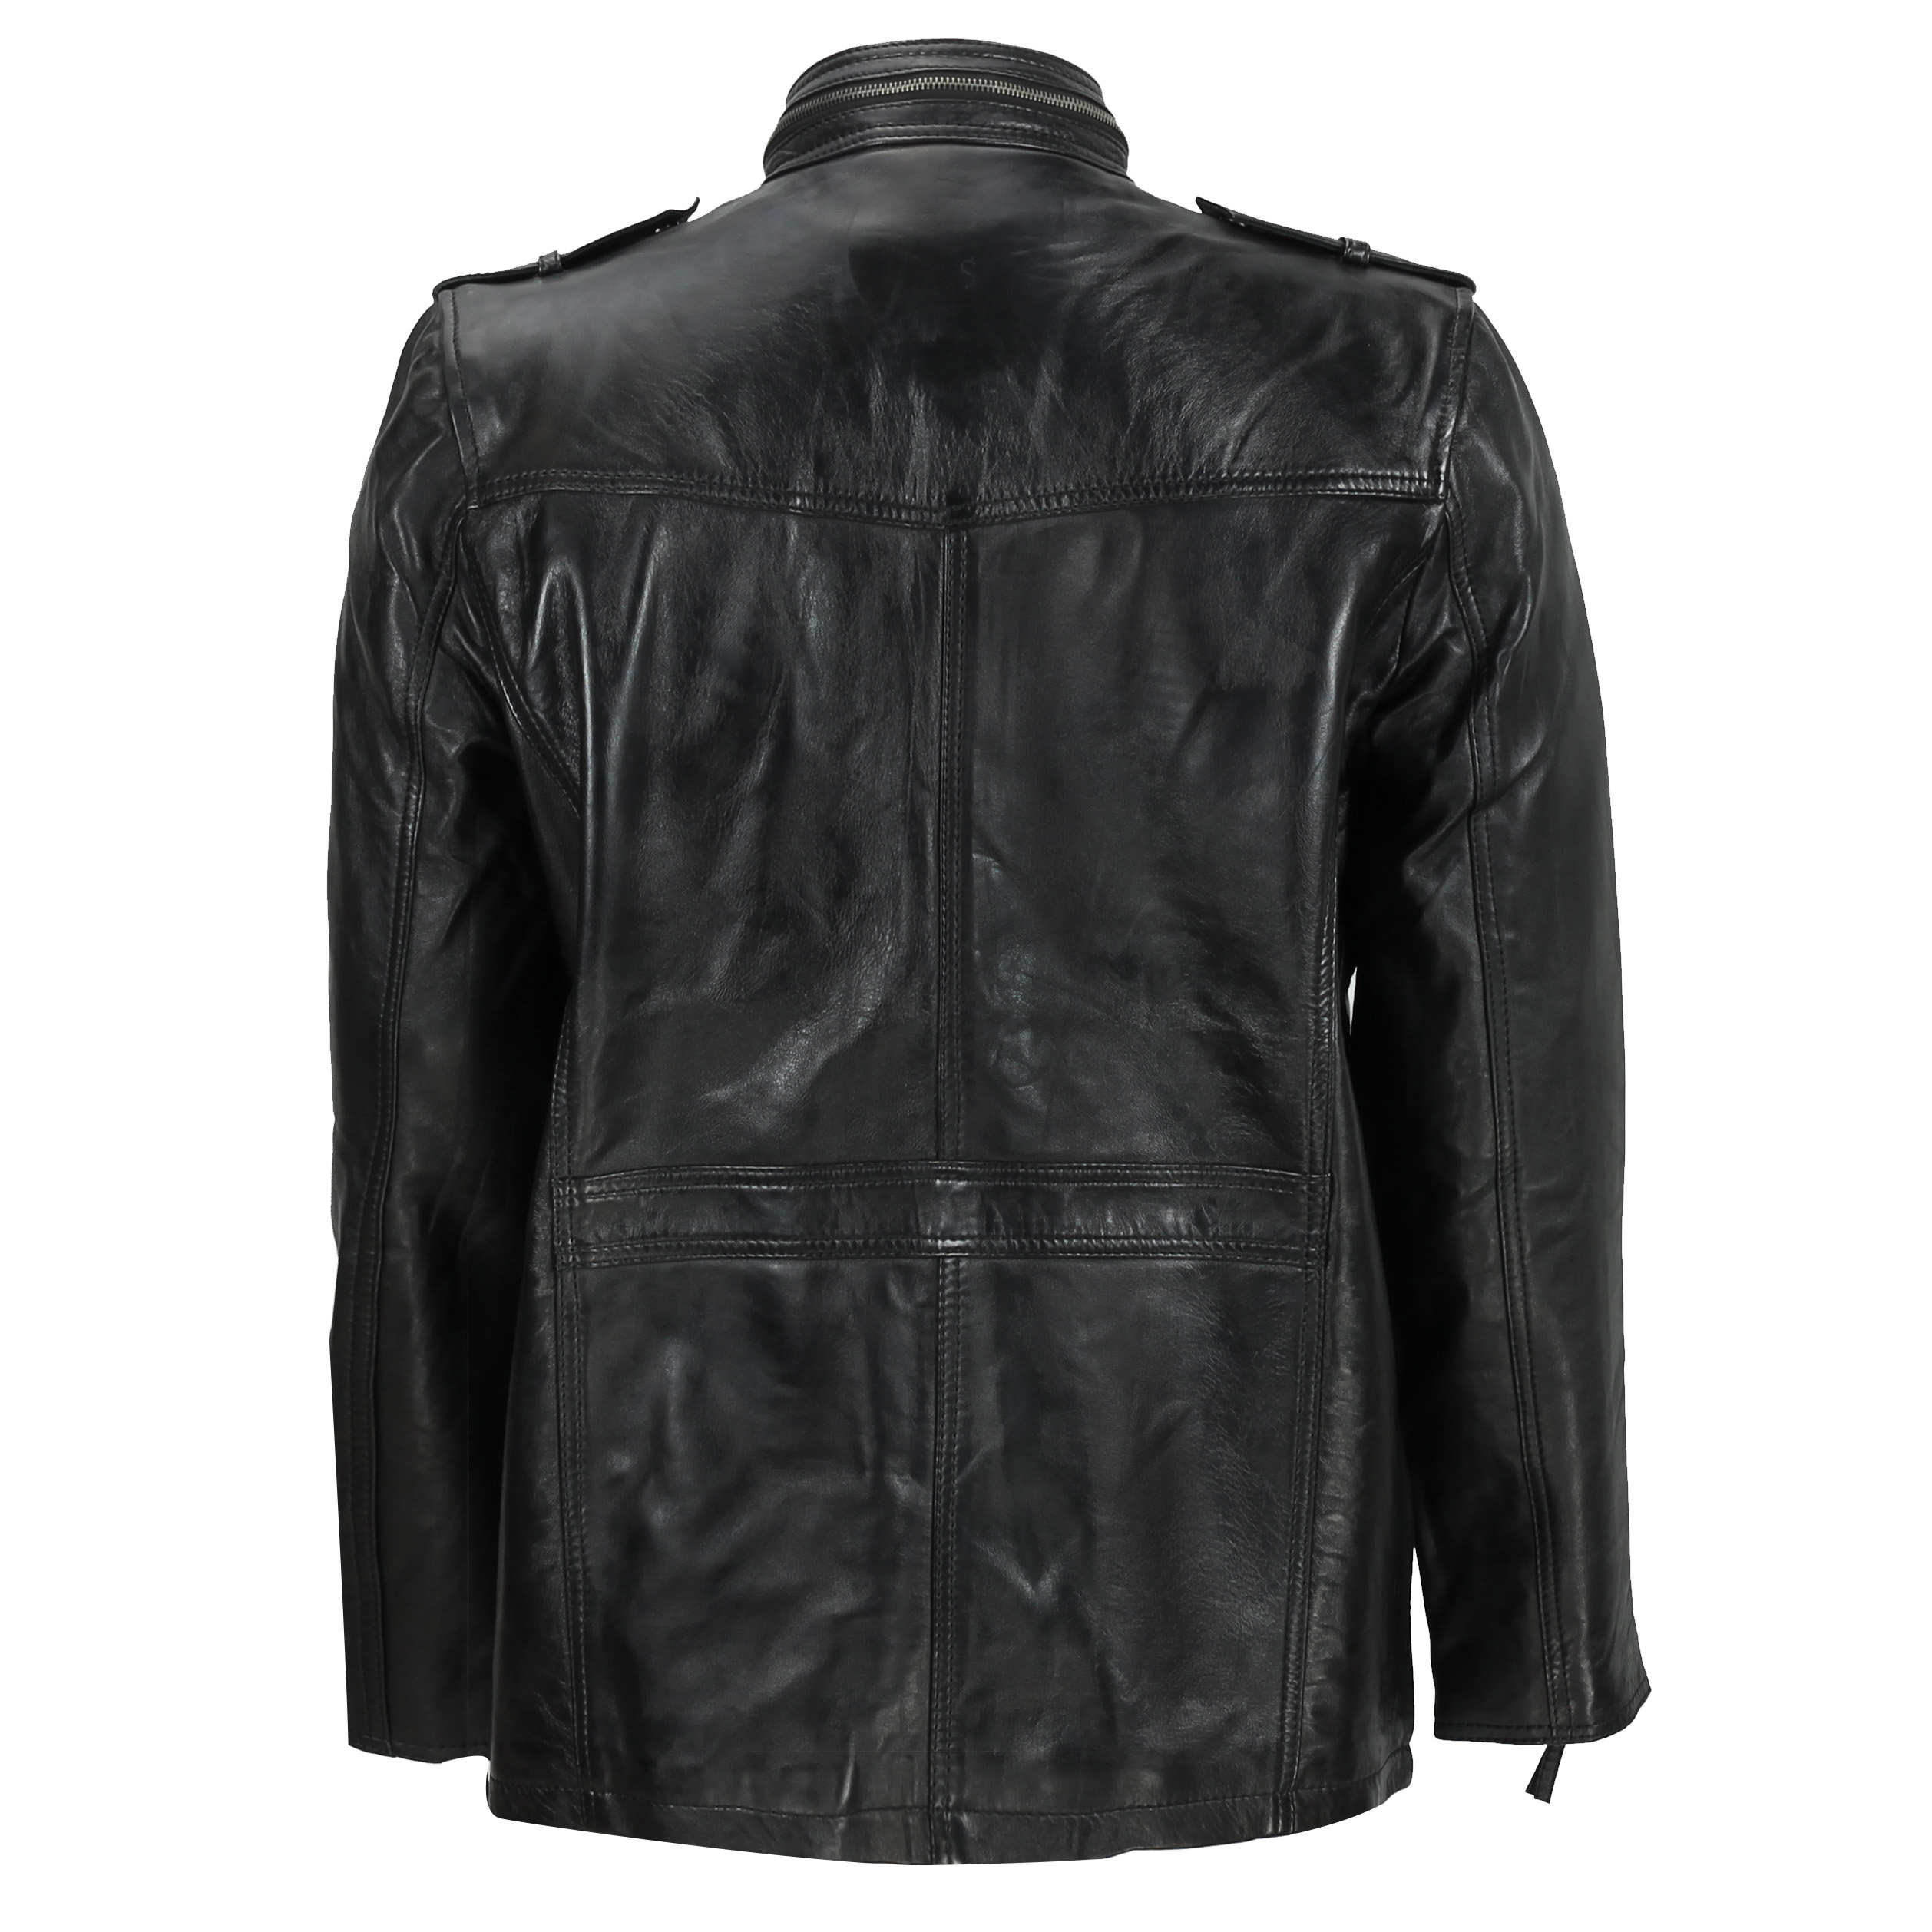 MEN’S MILITARY LEATHER JACKET IN BLACK